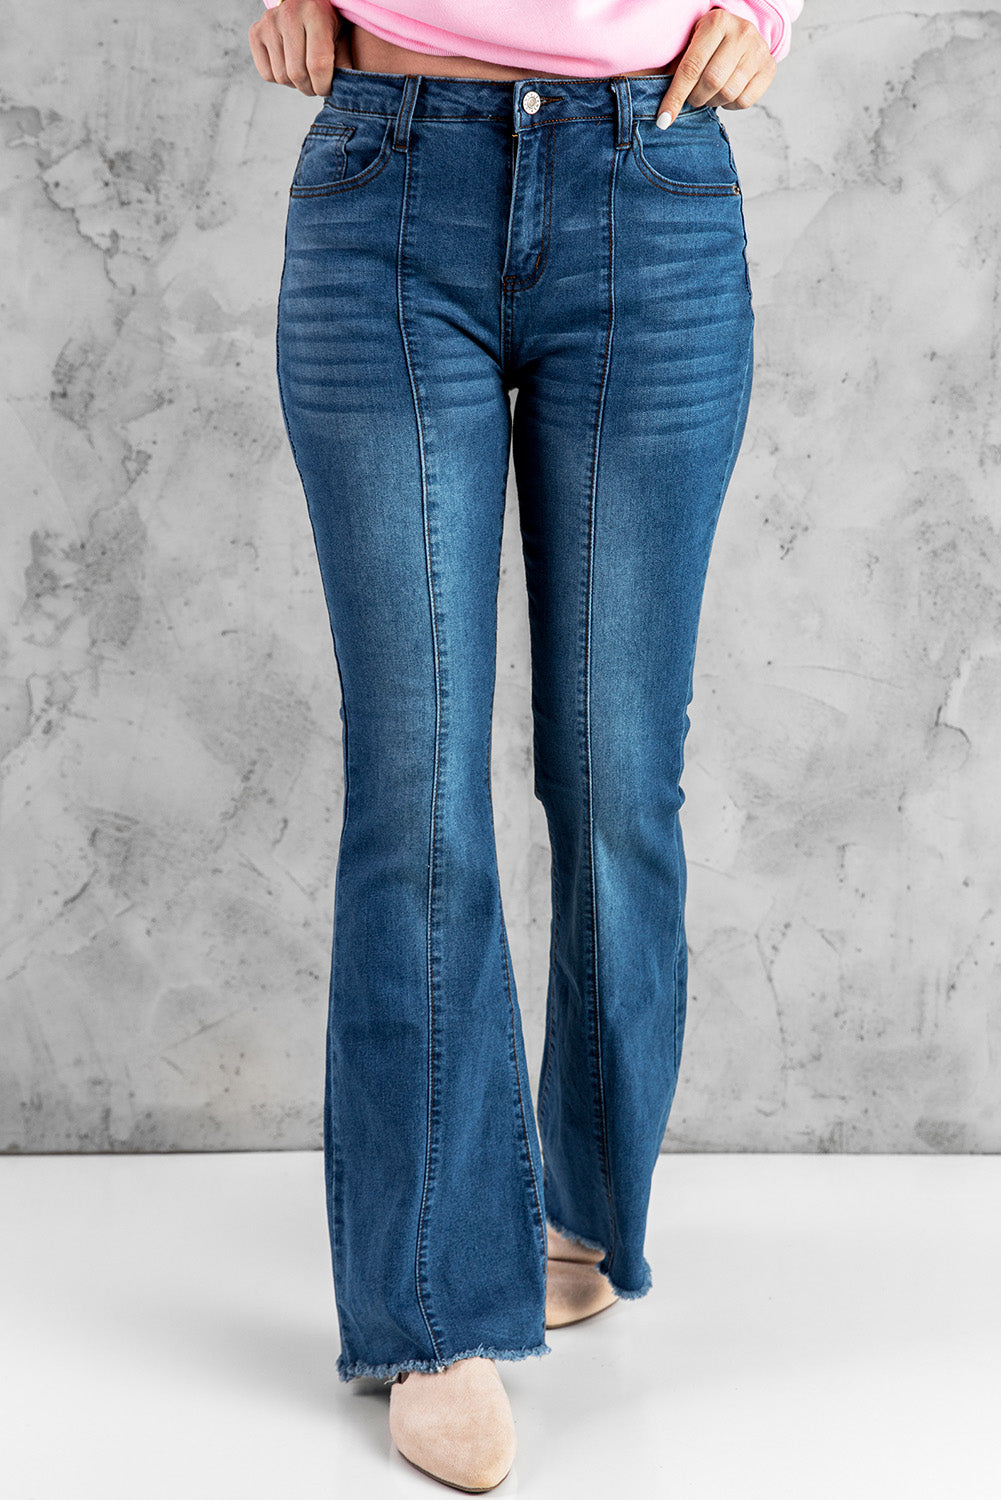 Casual Blue Raw Hem Flared Jeans with Pockets